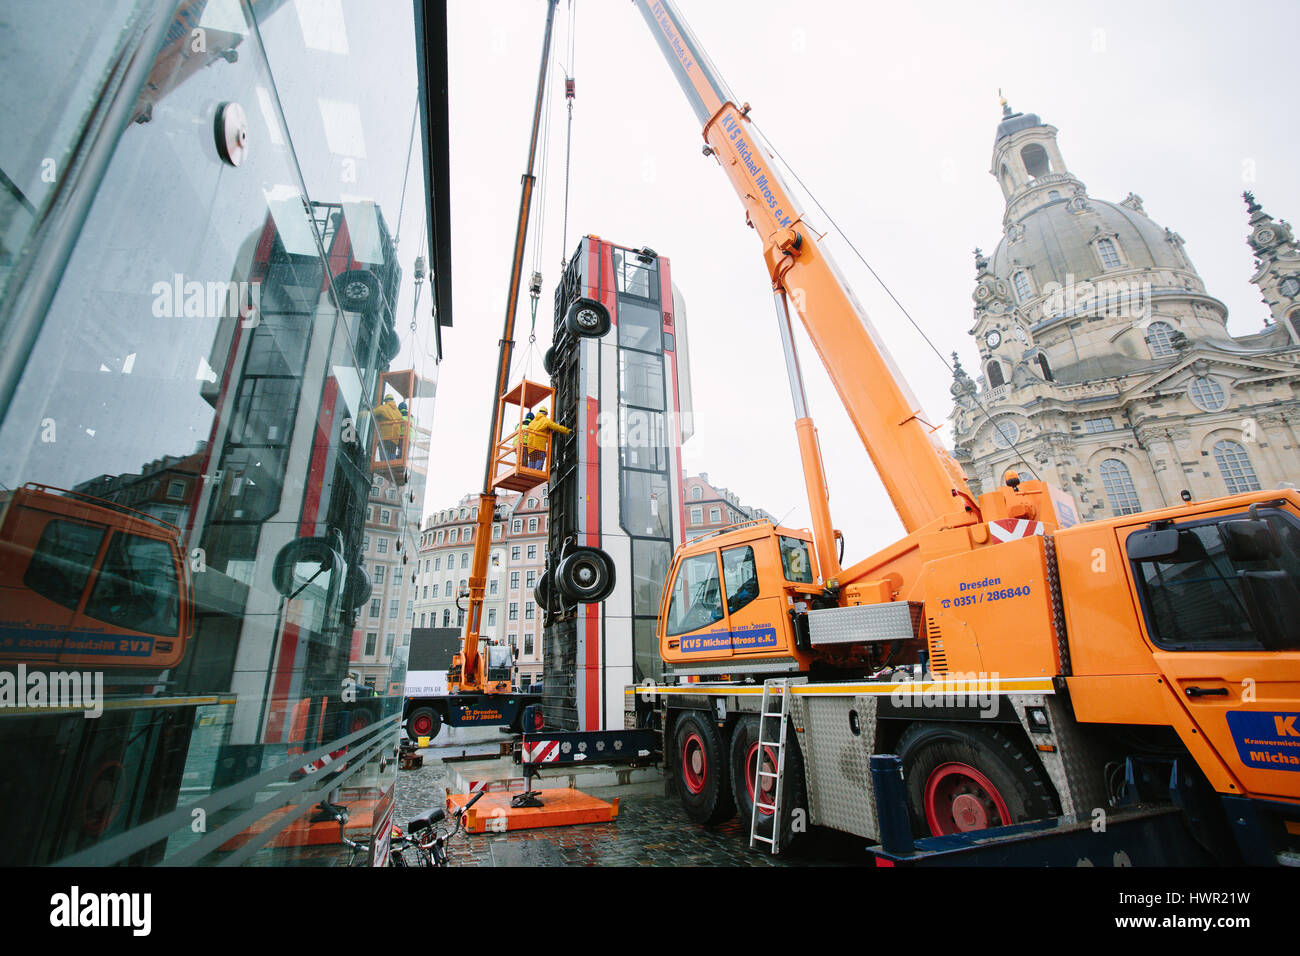 Dresden, Germany. 4th Apr, 2017. The bus installation "Monument" is disassembled at the Neumarkt in Dresden, Germany, 4 April 2017. The three vertically placed busses of the artist Manaf Halbouni will be moved to the Gorki theatre in Berlin. Photo: Oliver Killig/dpa-Zentralbild/dpa/Alamy Live News Stock Photo